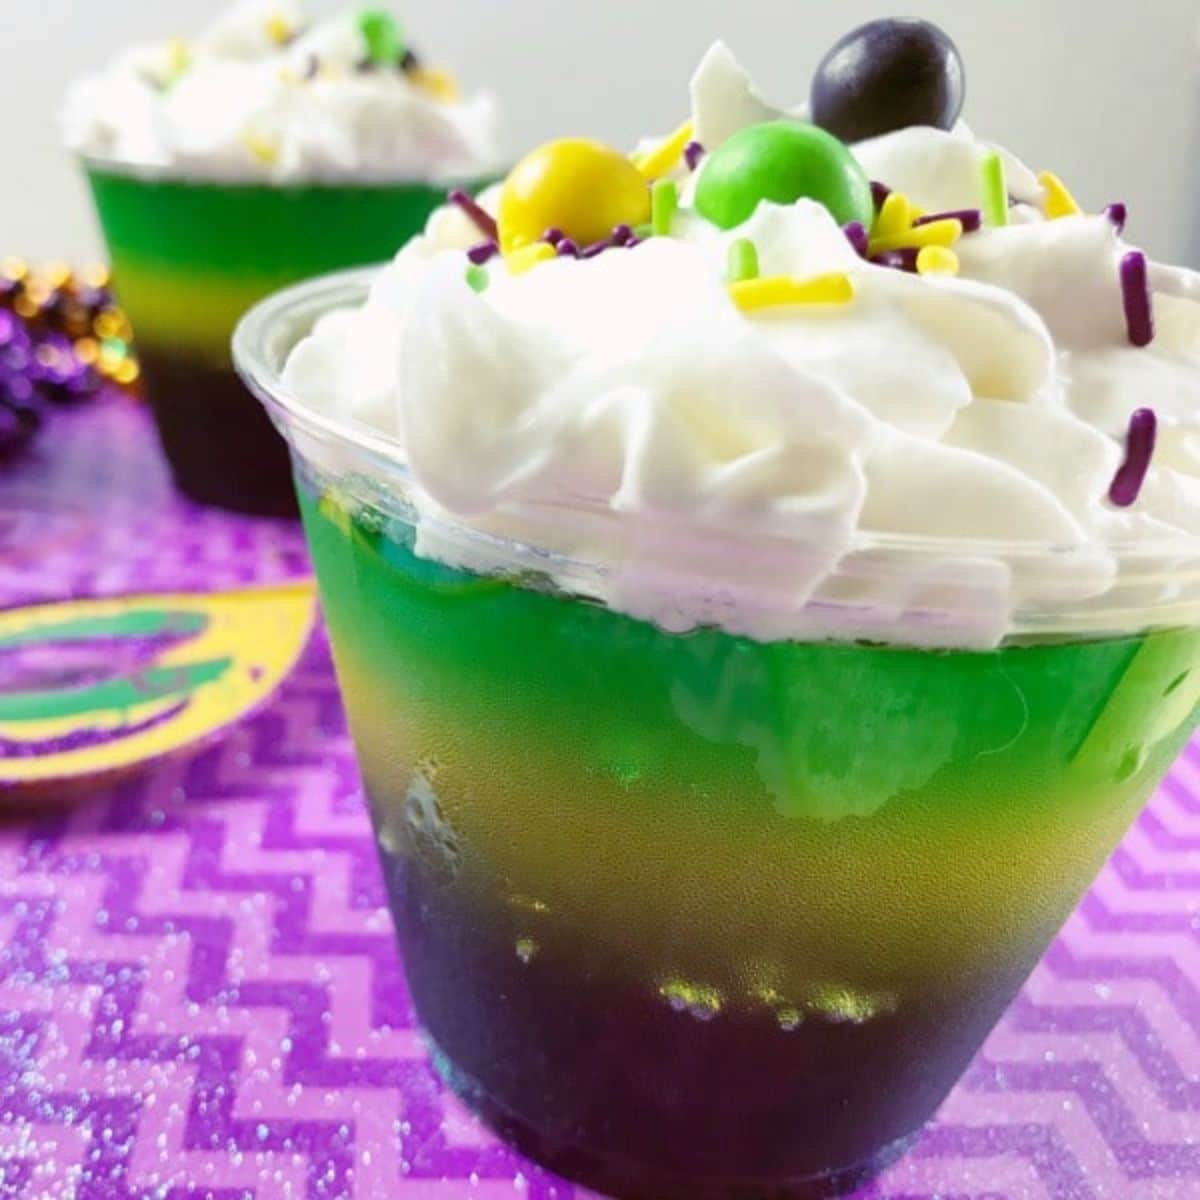 Layered Jello for Mardi Gras in cups topped with whipped cream, sprinkles and skittles on purple paper.